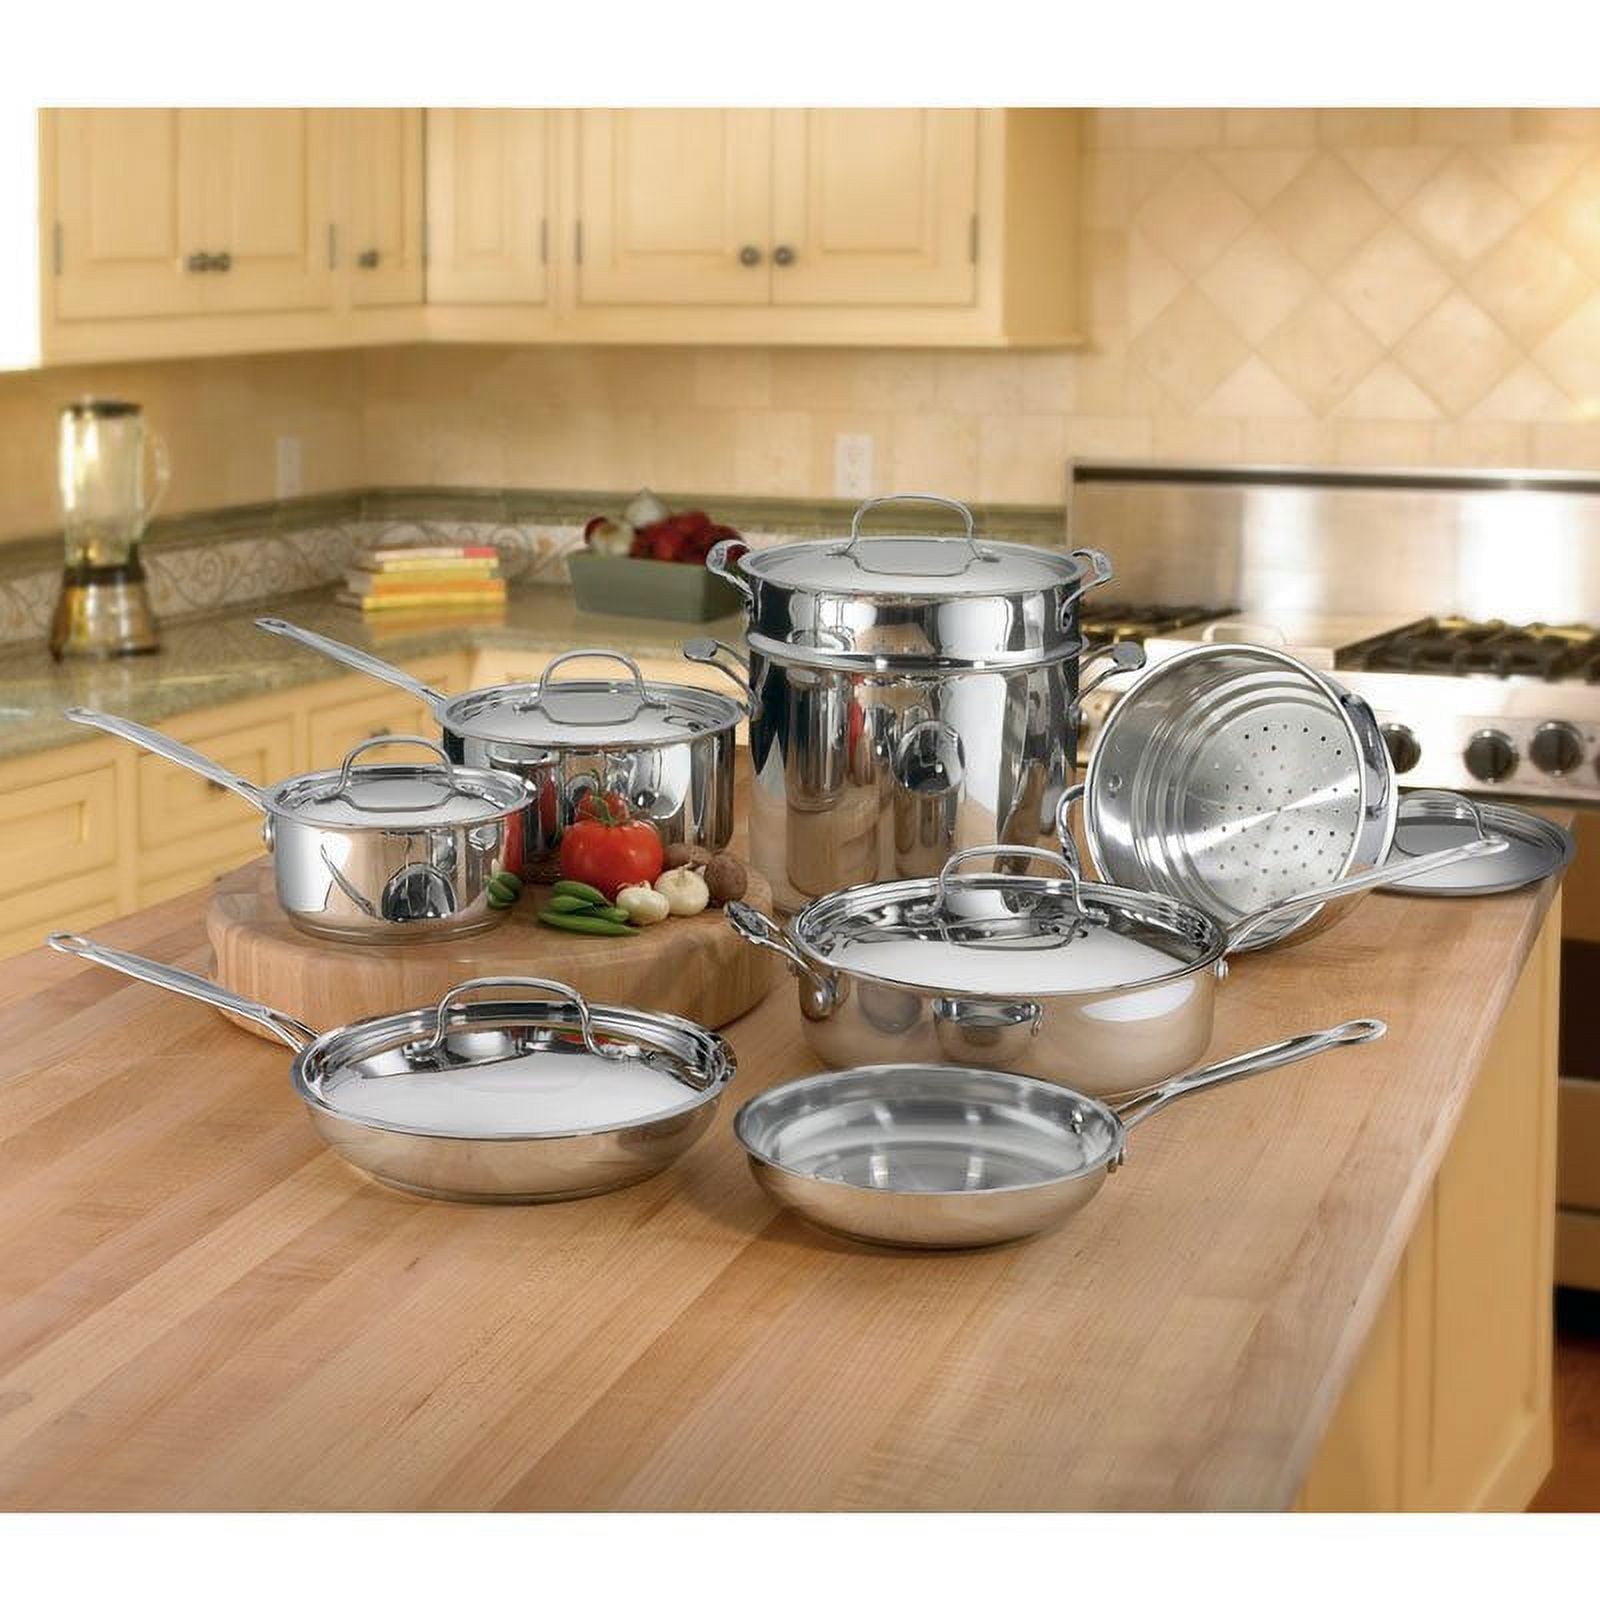  Cuisinart 11-Piece Cookware Set, Chef's Classic Stainless Steel  Collection 77-11G: Cuisinart Pot Set: Home & Kitchen